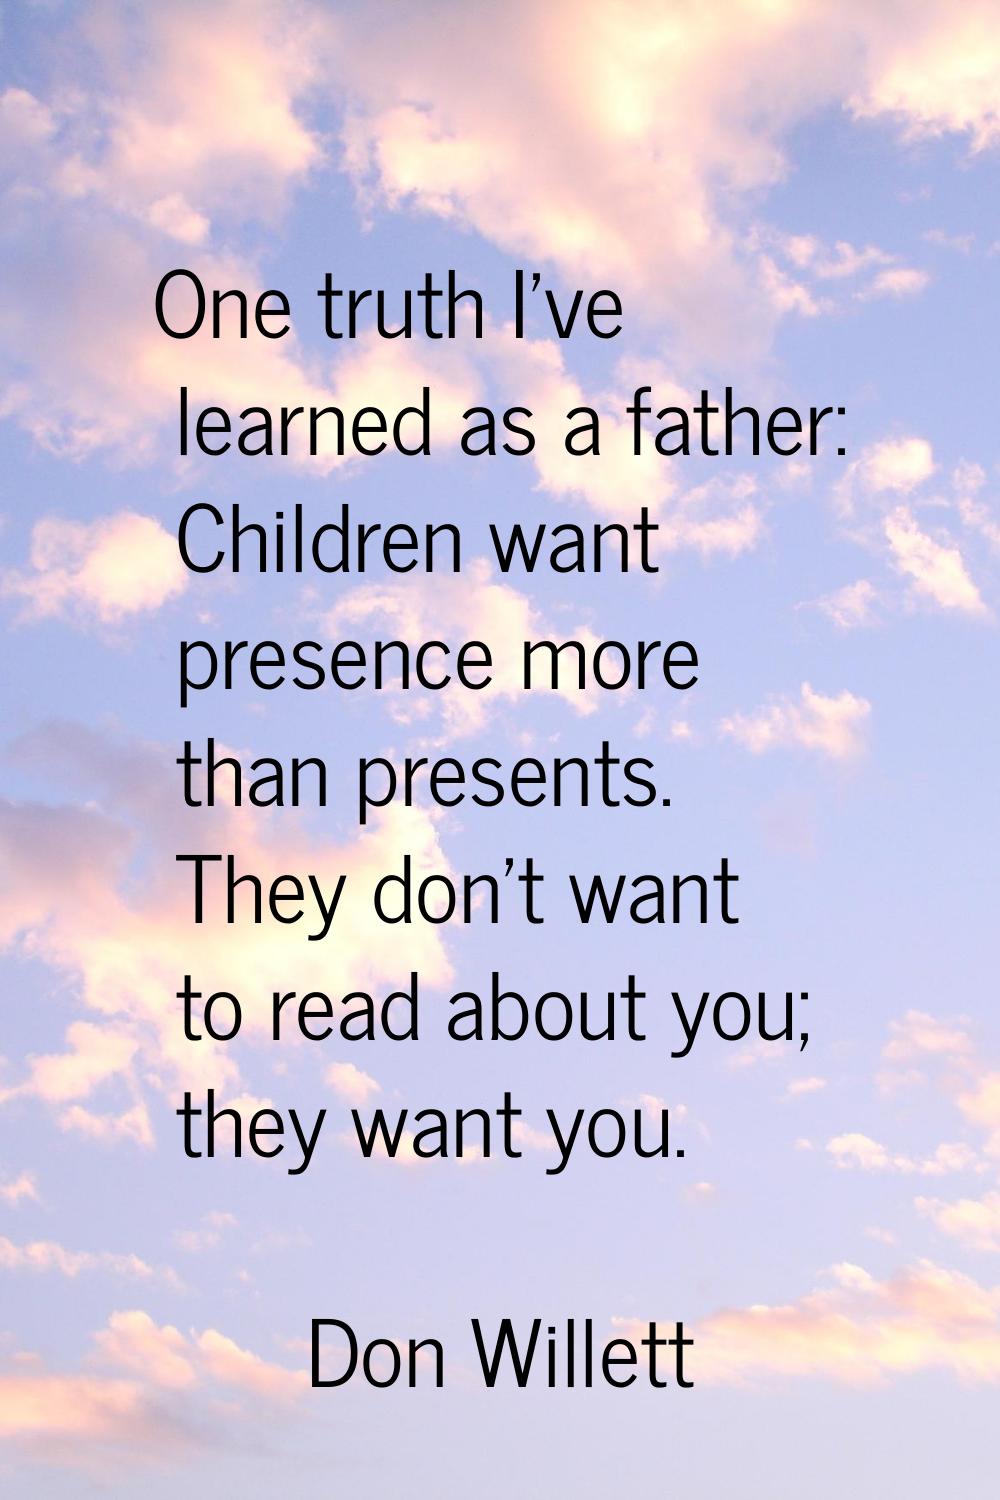 One truth I've learned as a father: Children want presence more than presents. They don't want to r